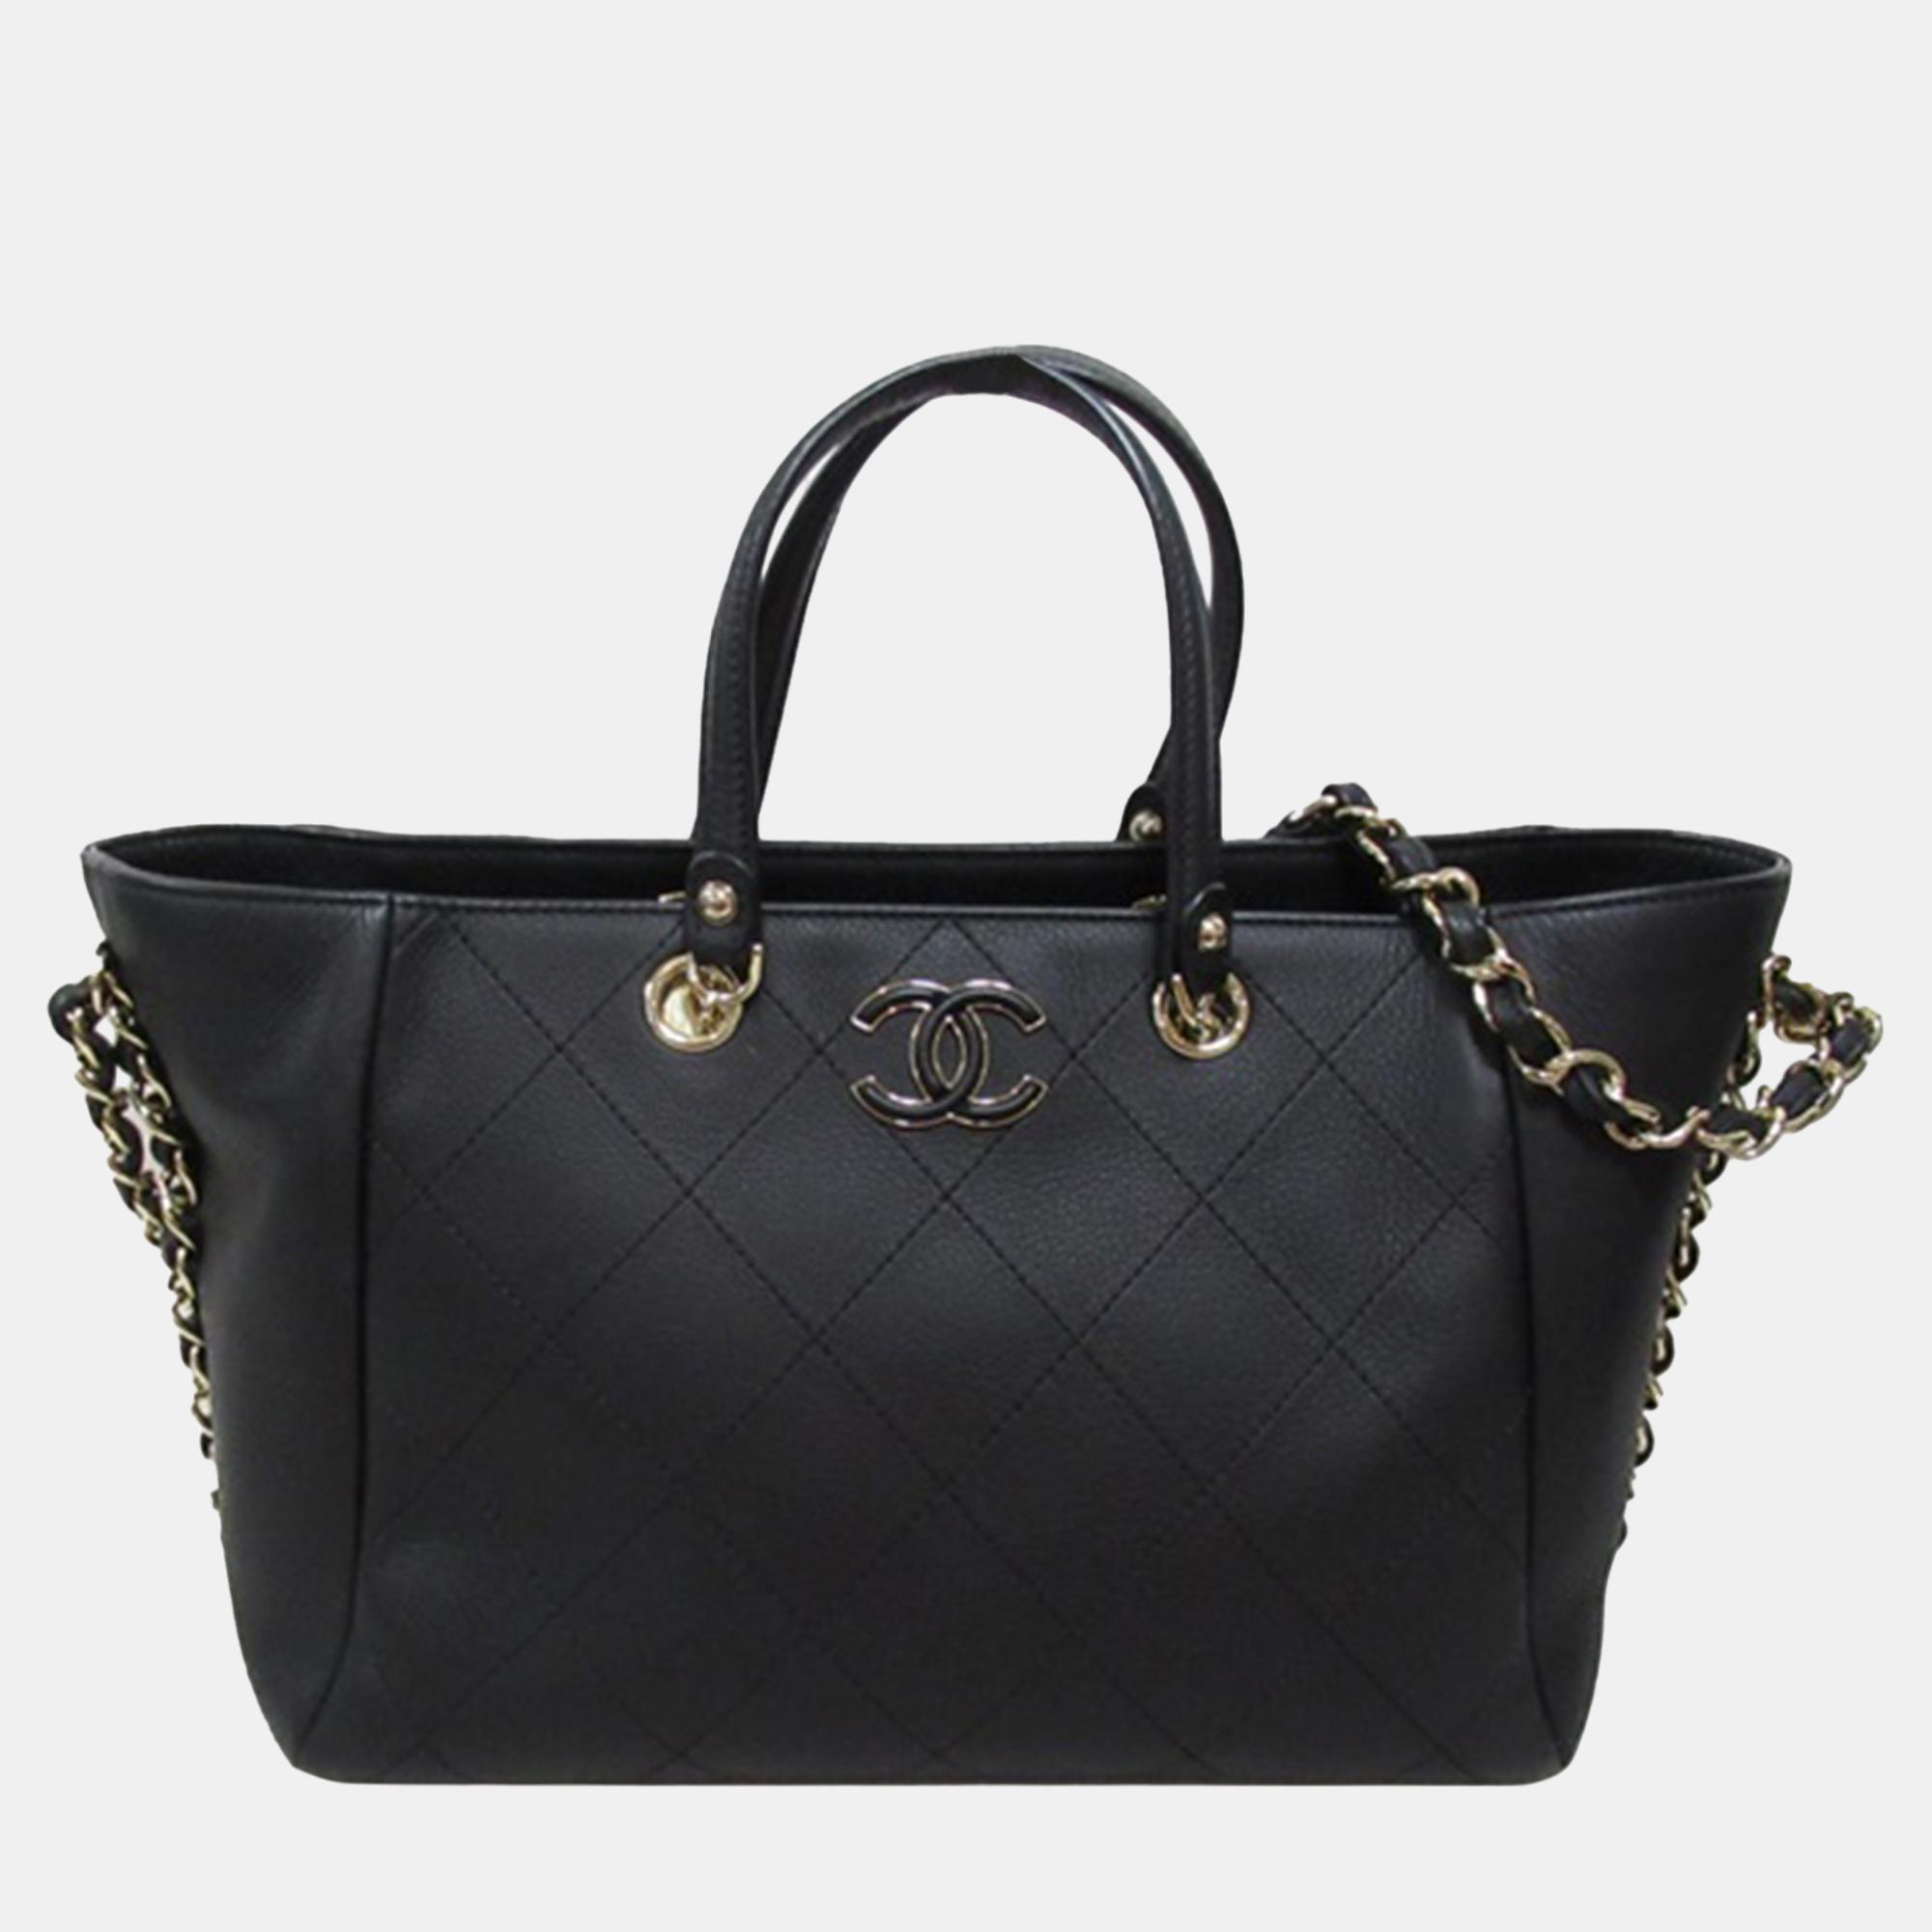 Pre-owned Chanel Black Small Bullskin Stitched Shopping Tote